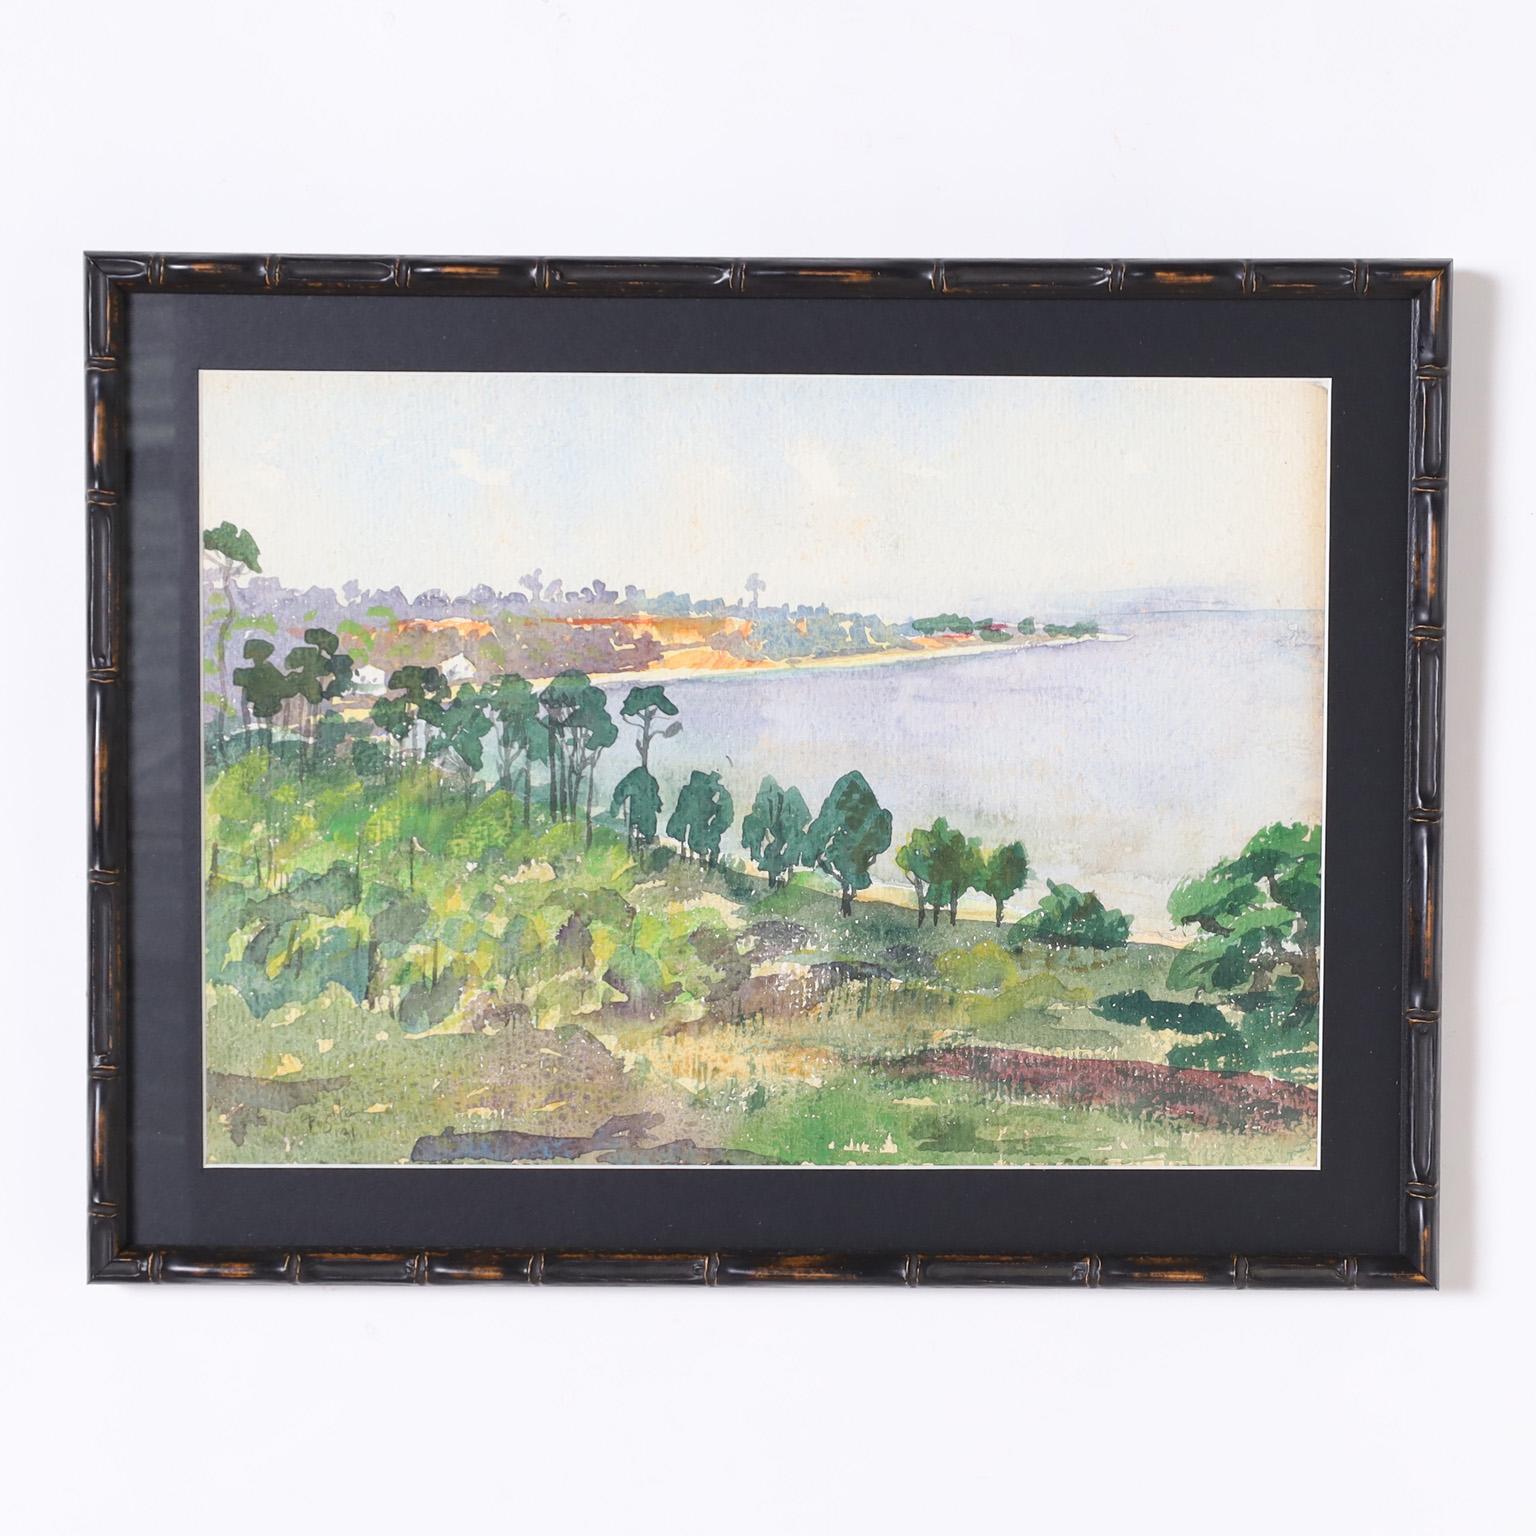 Historically significant group of three watercolors on paper depicting Escambia Bay Florida as it was before development. Signed by noted American artist Joy Postle in 1931. Presented under glass in faux bamboo wood frames.